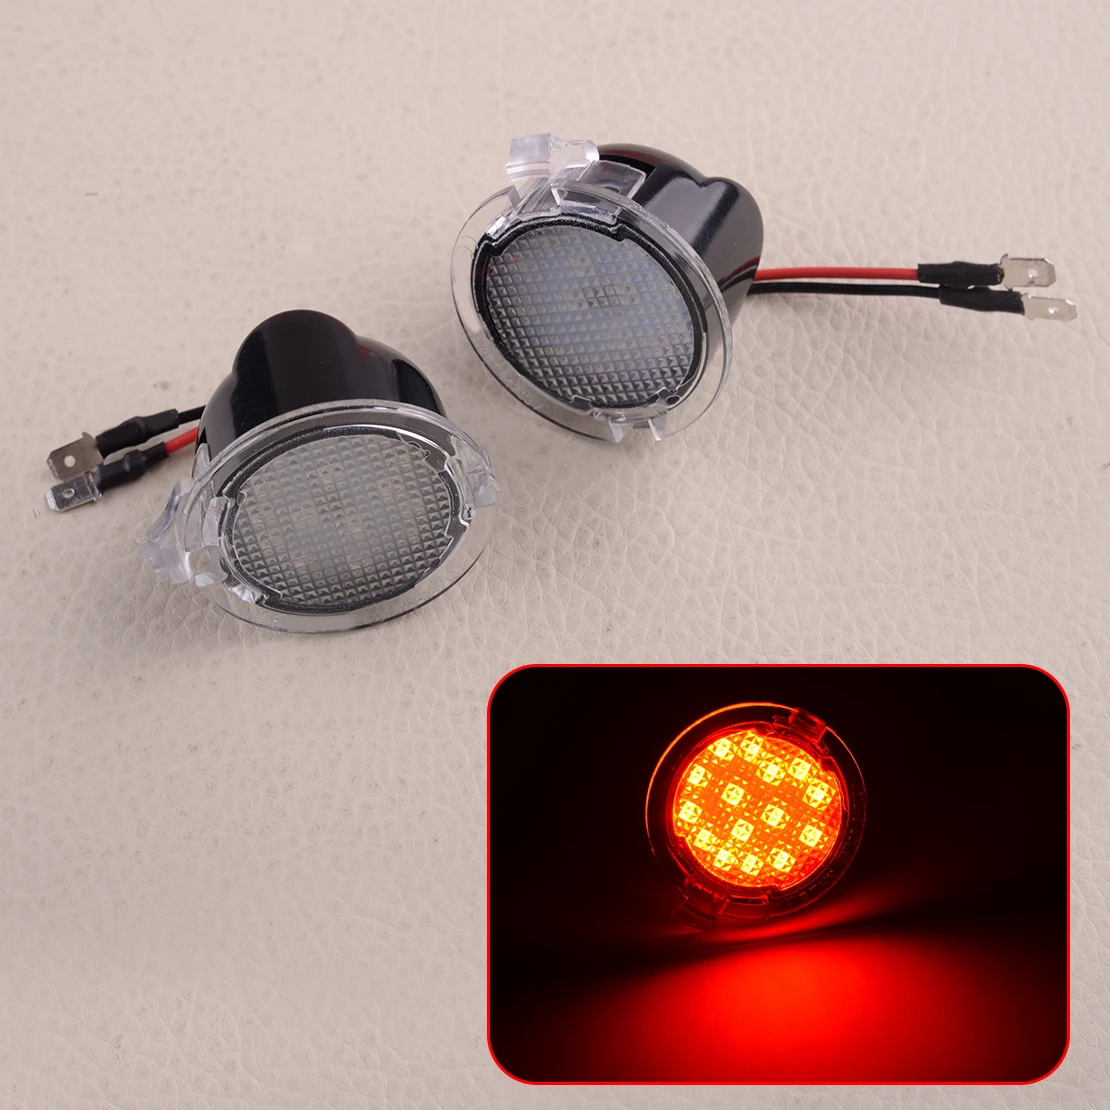 1 Pair Red LED Side Mirror Puddle Light Lamp 12V Fit For Ford Mondeo MK5 Mustang Edge Explorer Everest Taurus Fusion Gen 2 Range